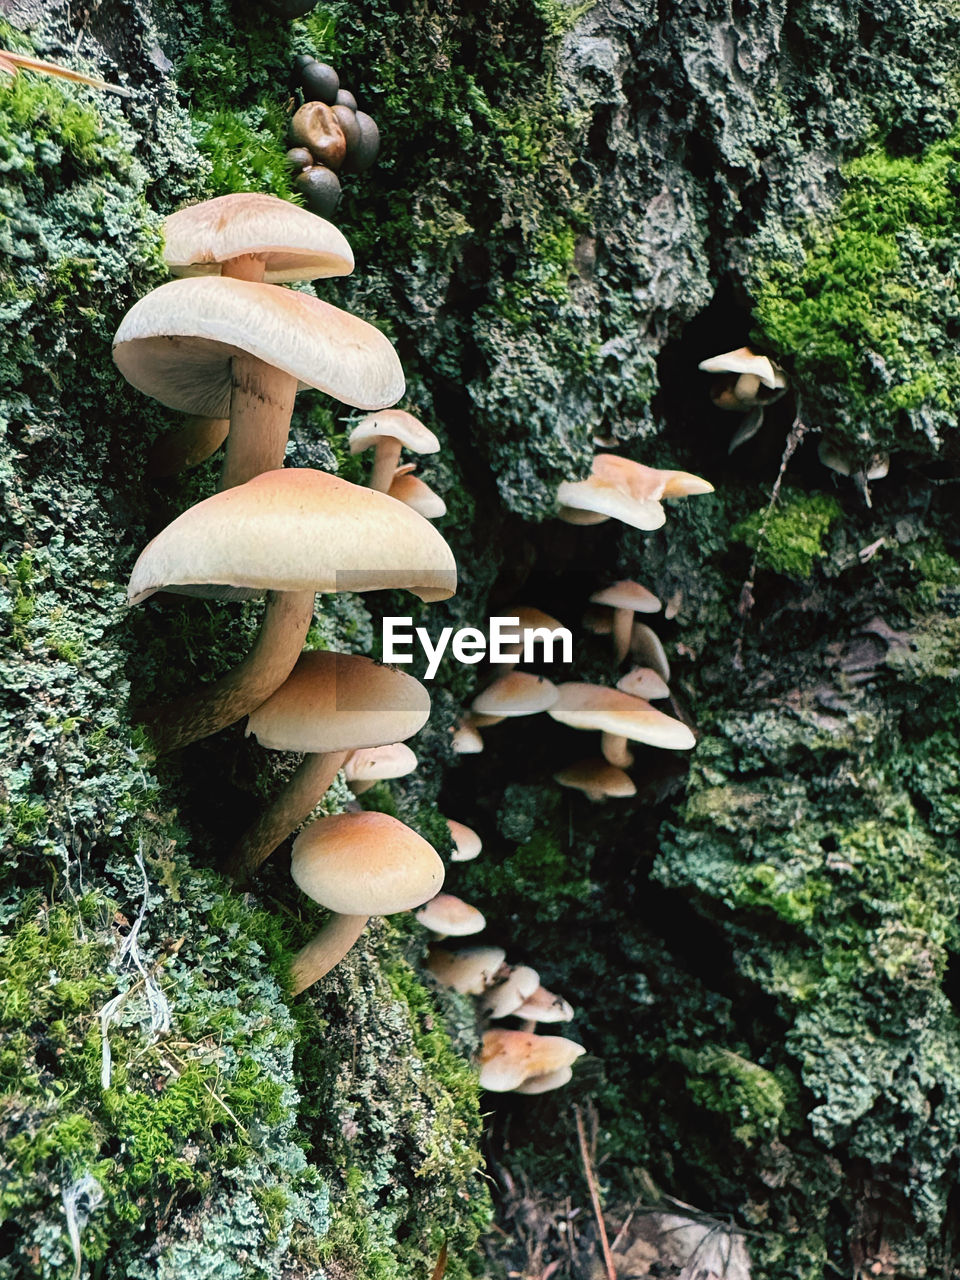 mushroom, fungus, plant, growth, vegetable, tree, woodland, forest, oyster mushroom, nature, toadstool, food, land, no people, day, moss, beauty in nature, edible mushroom, outdoors, high angle view, penny bun, tree trunk, trunk, green, food and drink, close-up, freshness, natural environment, autumn